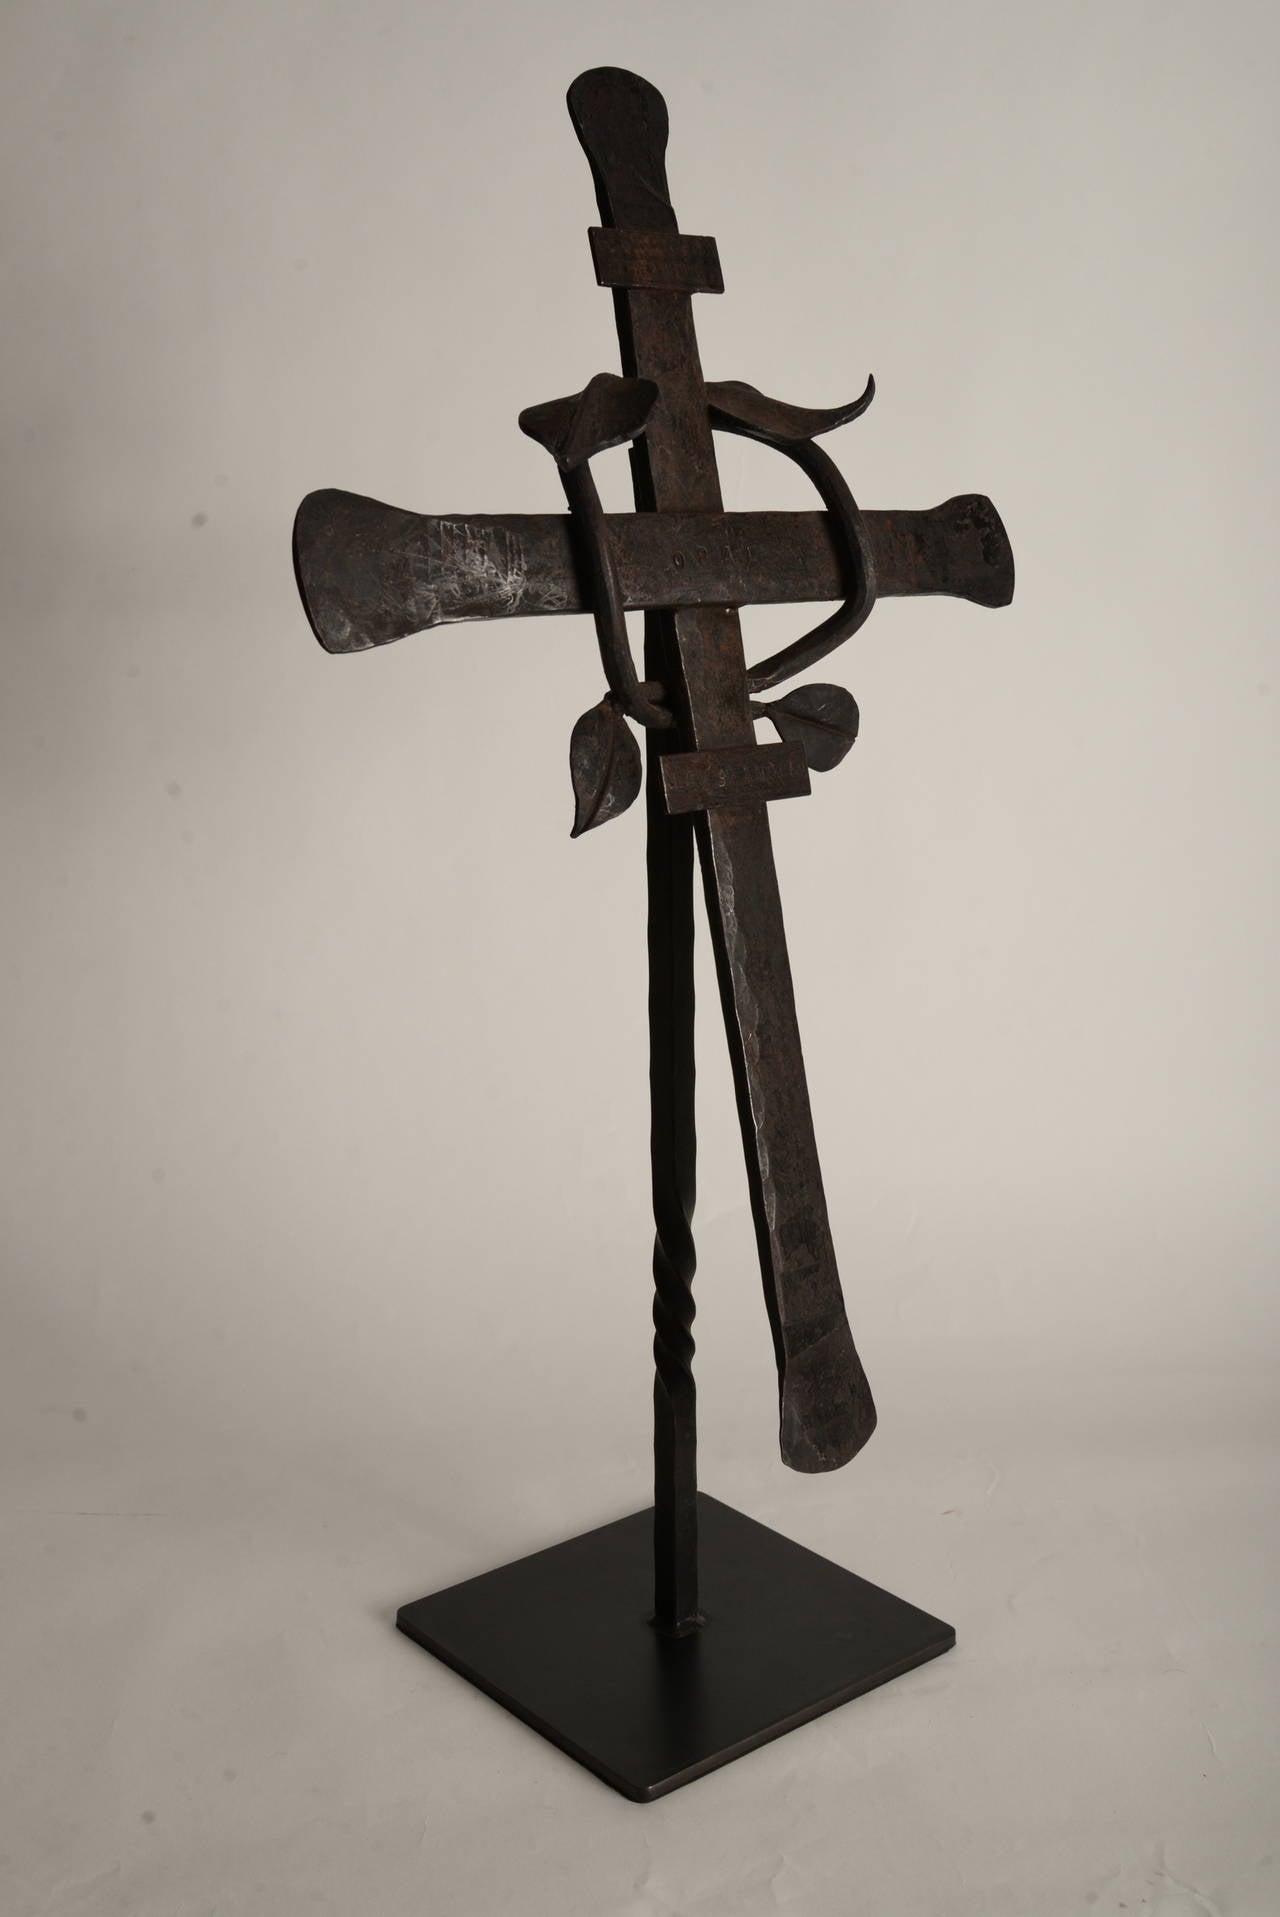 Hand-forged steel cross which appears to have been used as a dog memorial. The top plate reads 